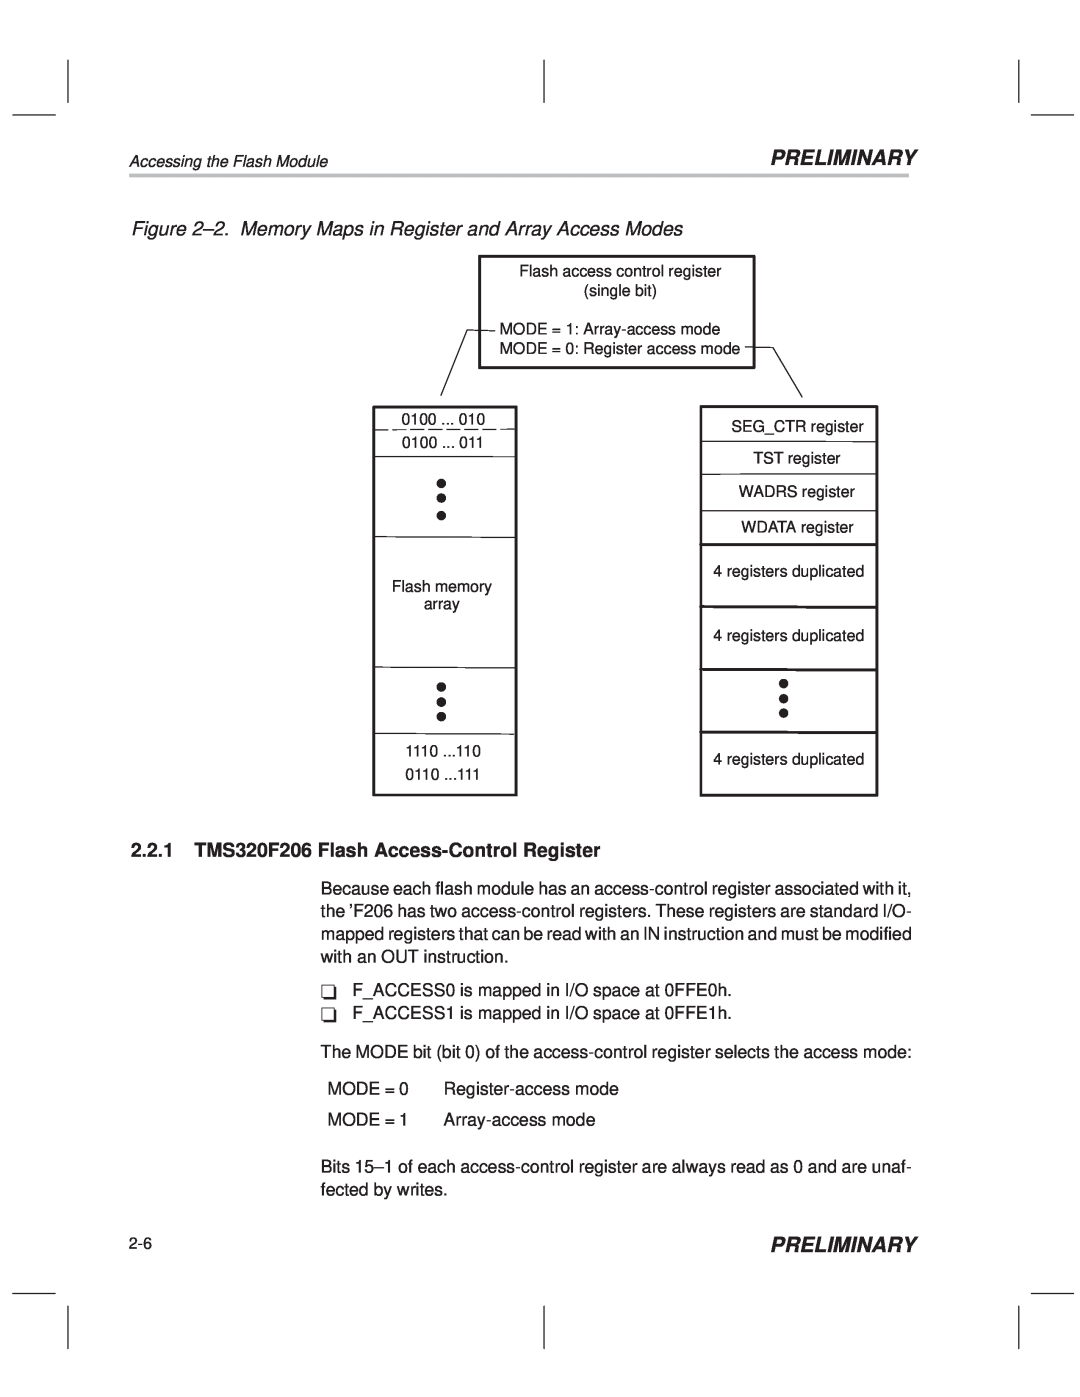 Texas Instruments TMS320F20x/F24x DSP manual ±2. Memory Maps in Register and Array Access Modes, Preliminary 